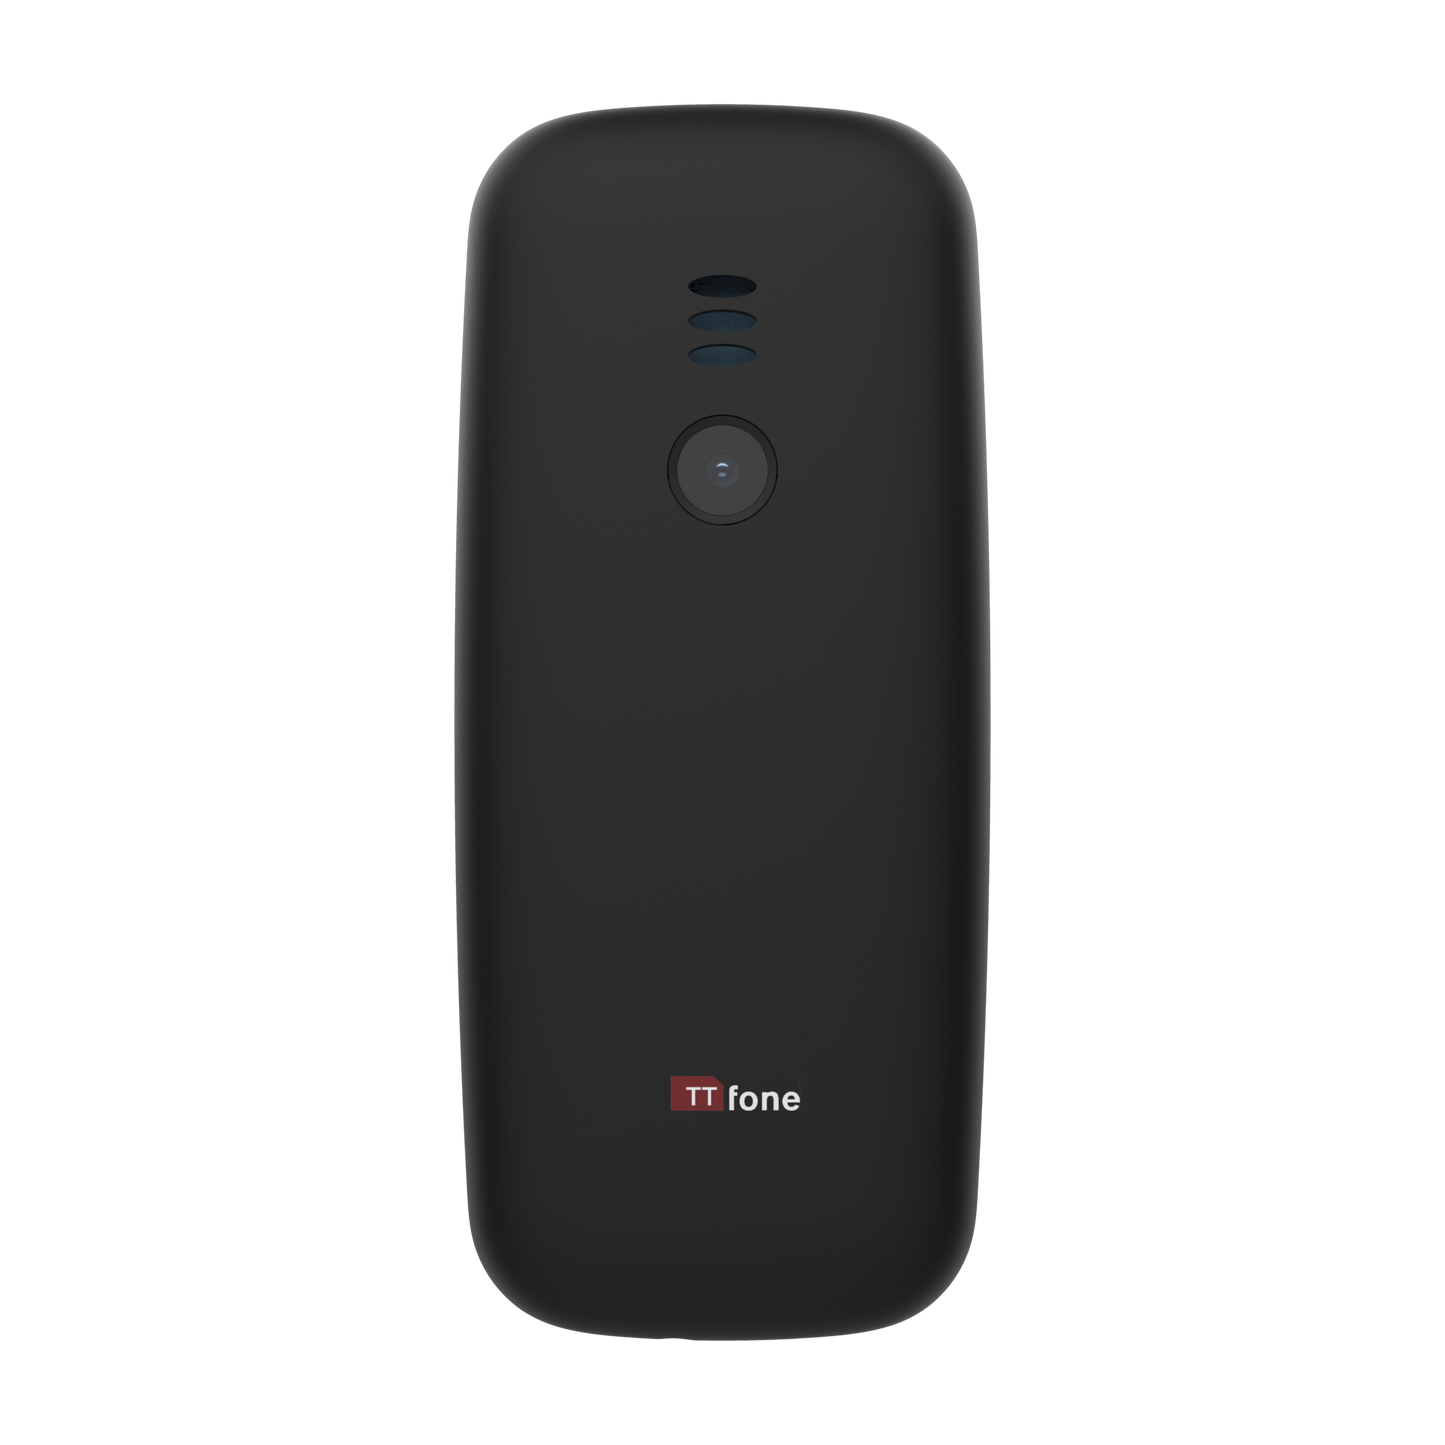 TTfone TT170 Black Dual SIM mobile - Warehouse Deals with Mains Charger, Vodafone Pay As You Go